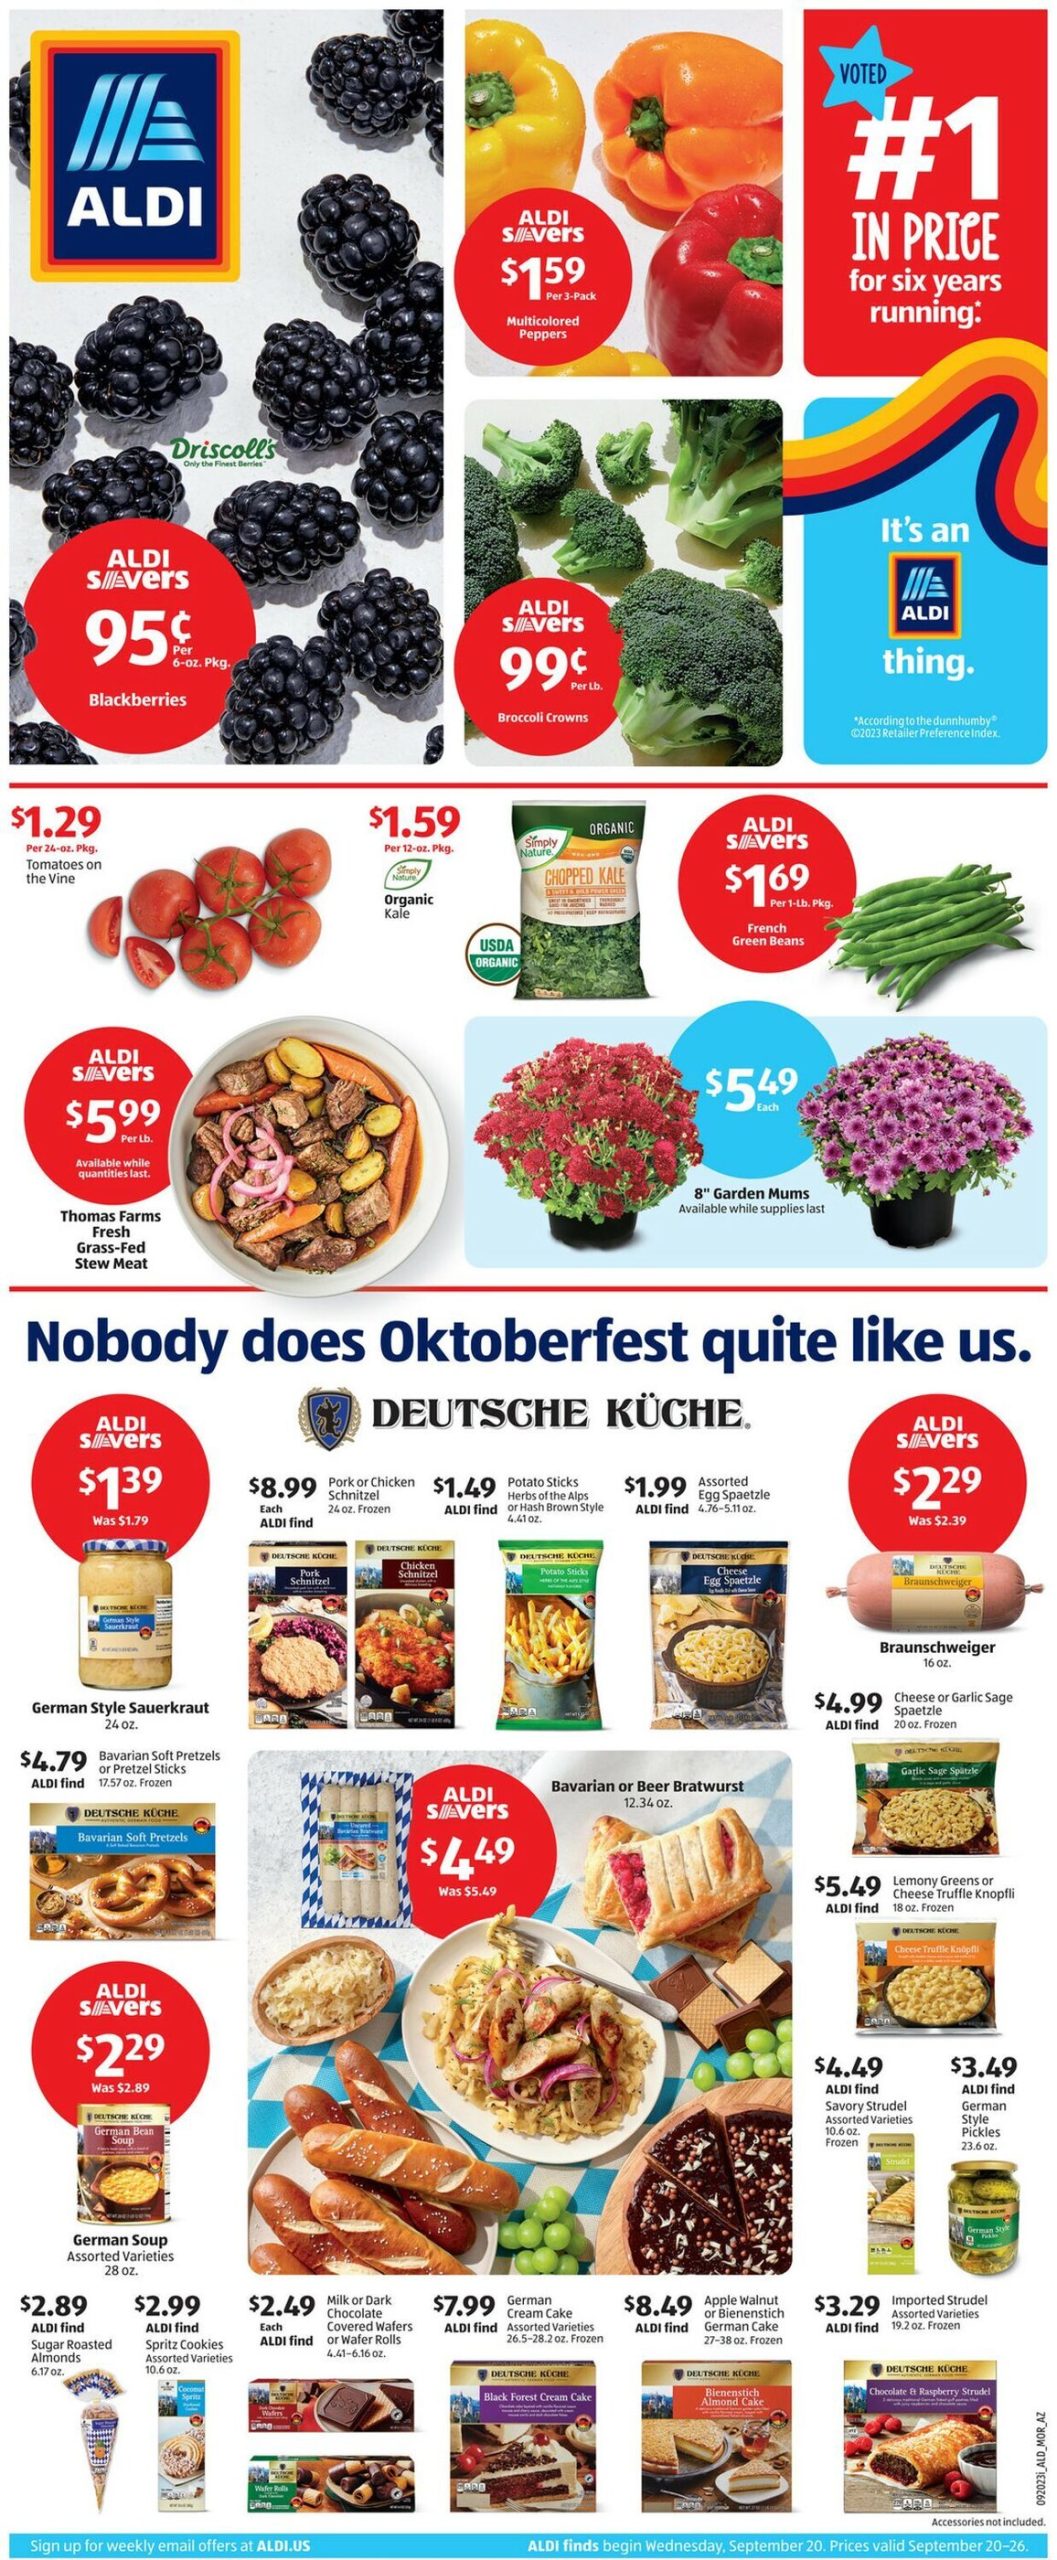 aldis current weekly ad